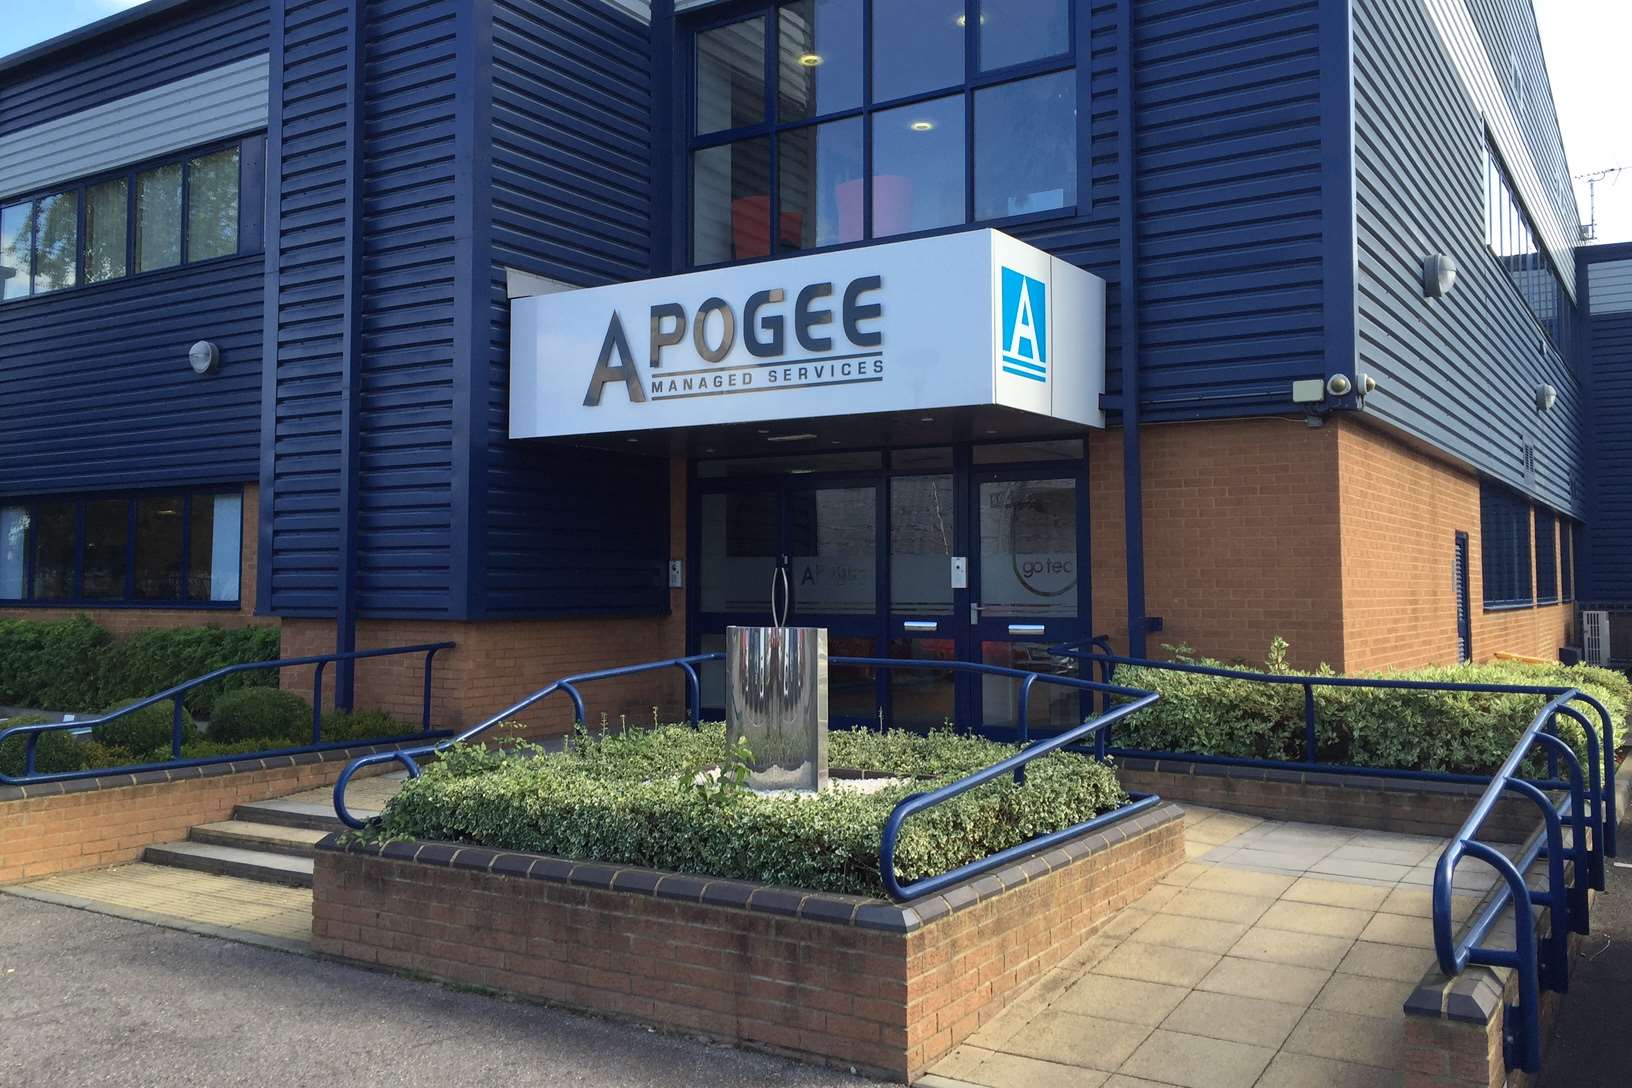 Apogee Corporation is based in Maidstone